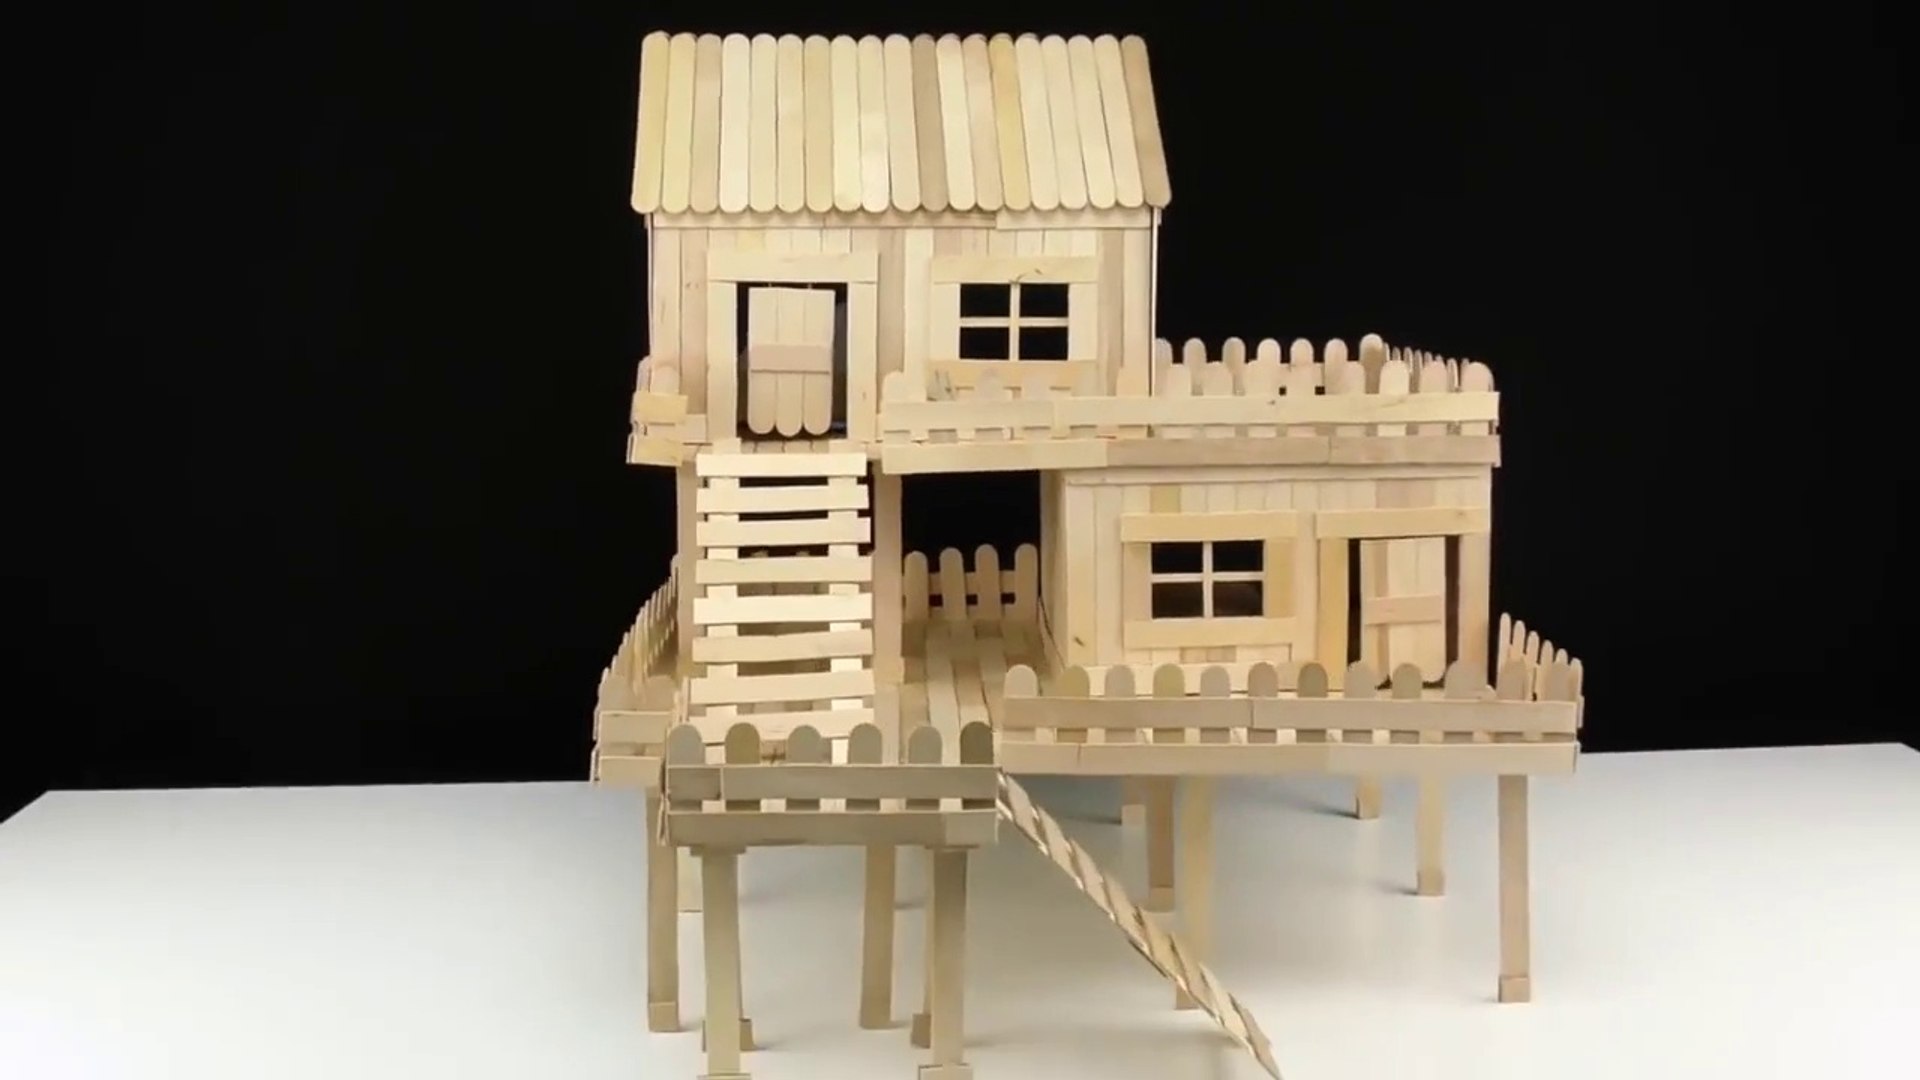 barbie doll house making video